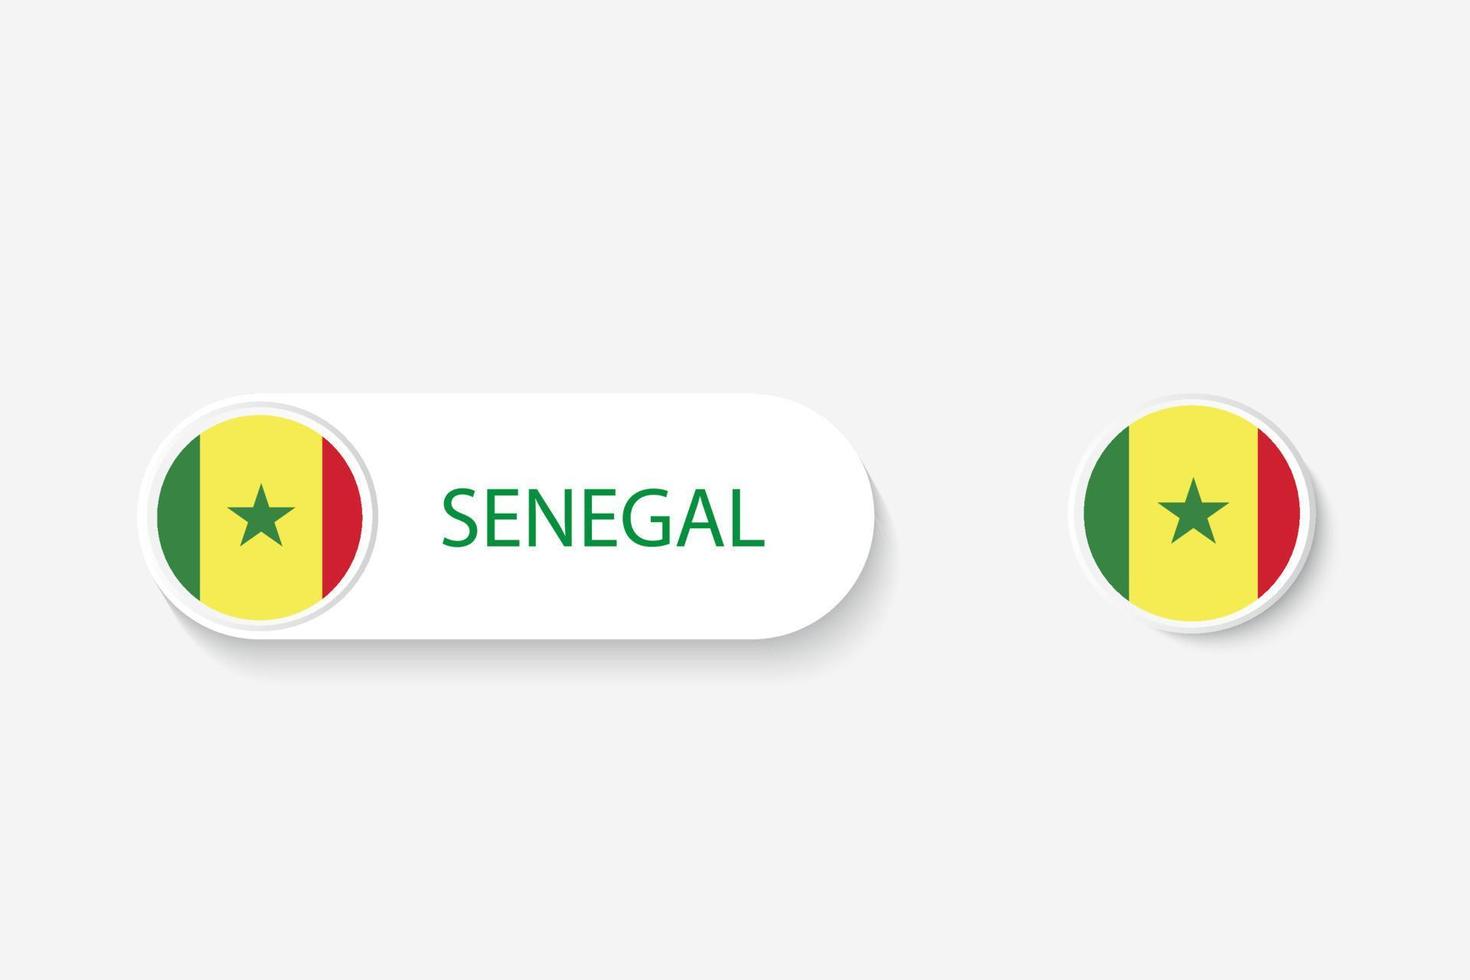 Senegal button flag in illustration of oval shaped with word of Senegal. And button flag Senegal. vector